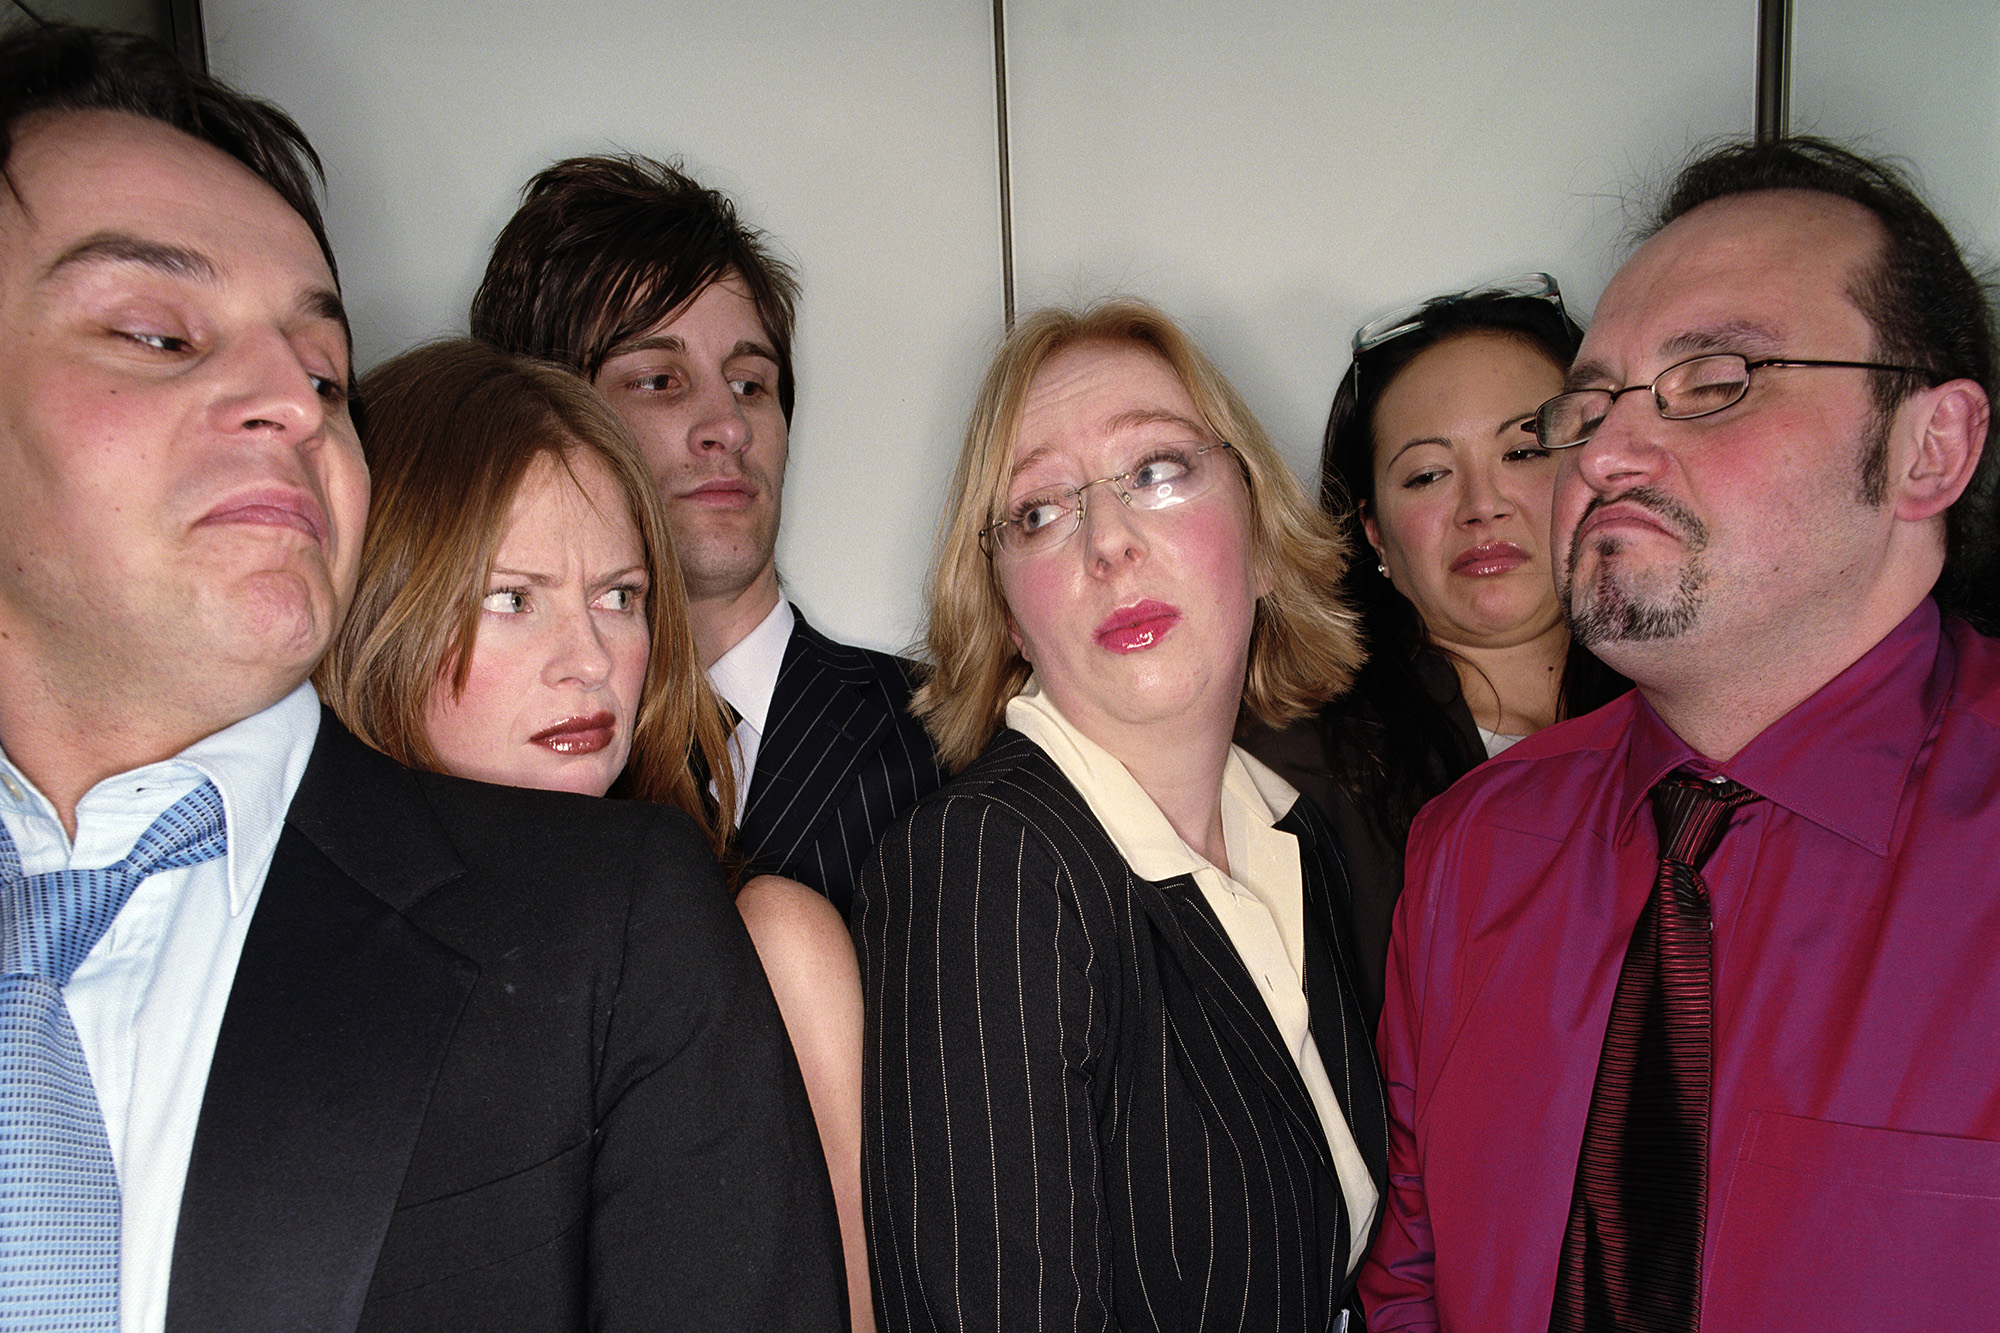 Group of business people in lift, close-up